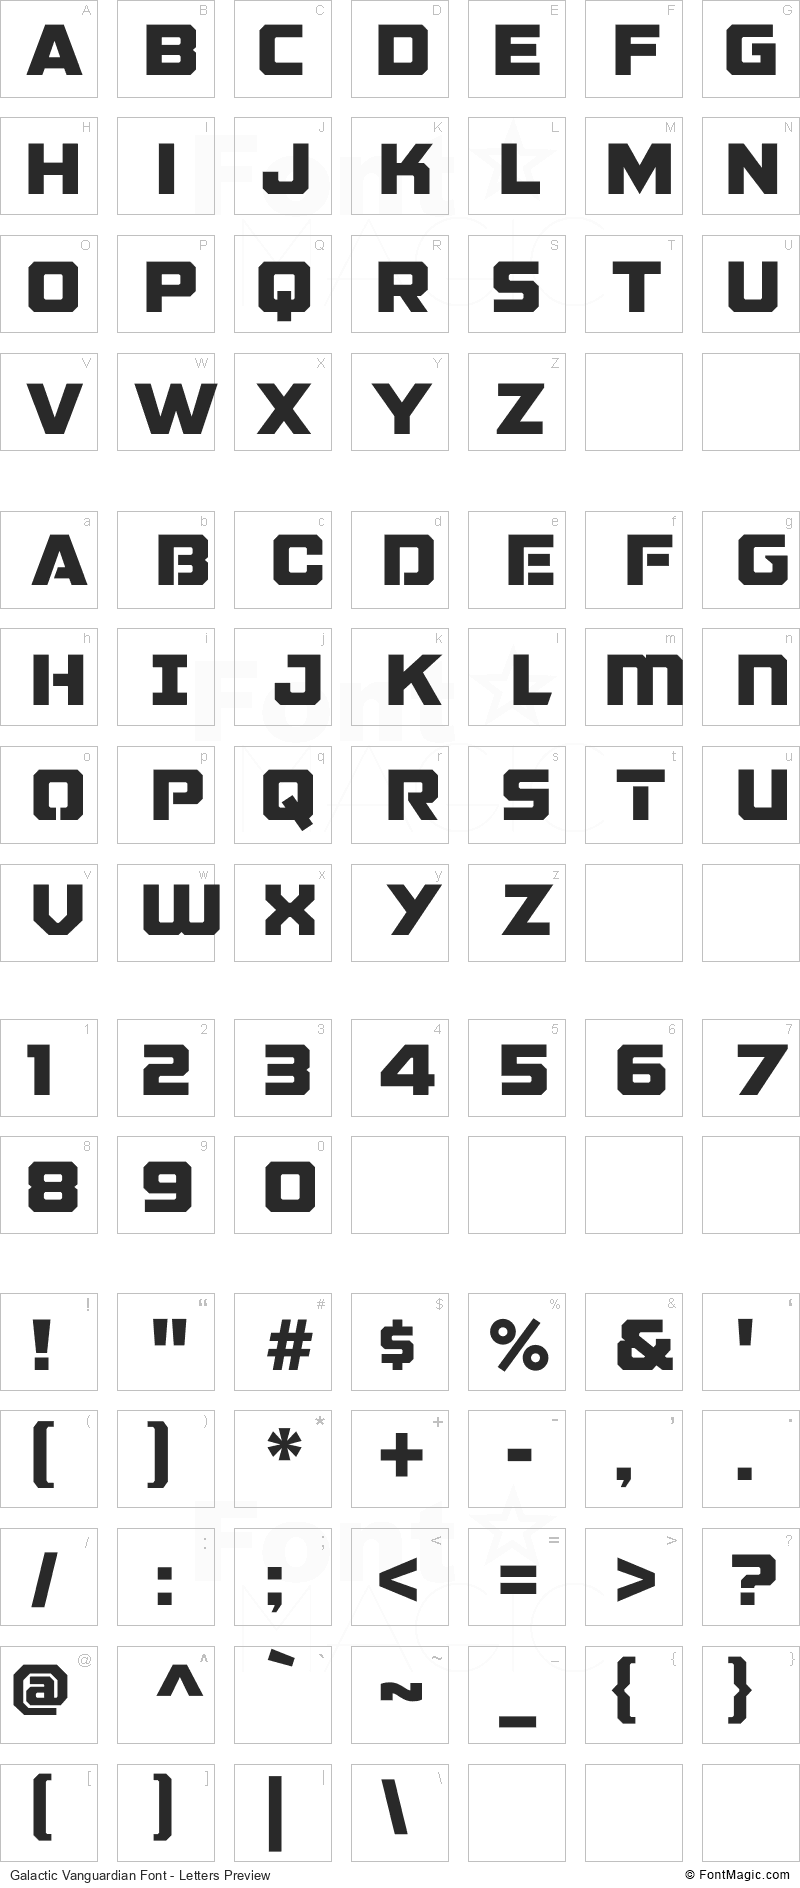 Galactic Vanguardian Font - All Latters Preview Chart